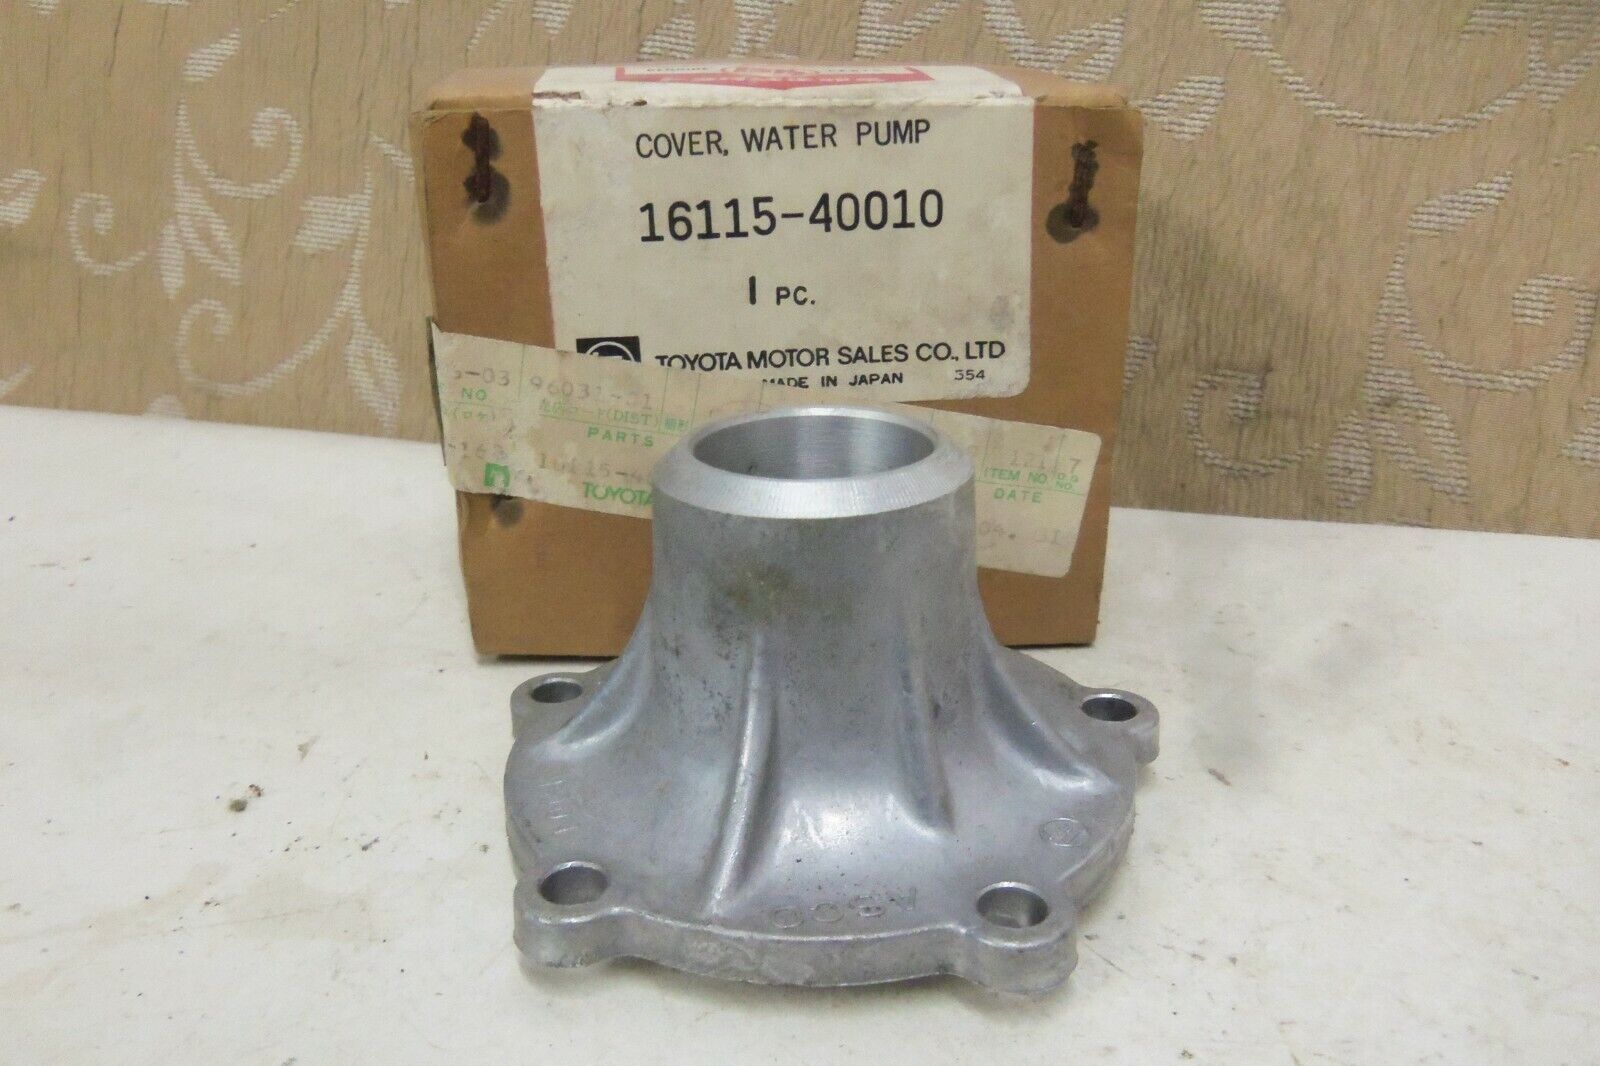 NOS GENUINE TOYOTA トヨタ WATER PUMP COVER CORONA RT85 95 102 112 117 RX12 22 28